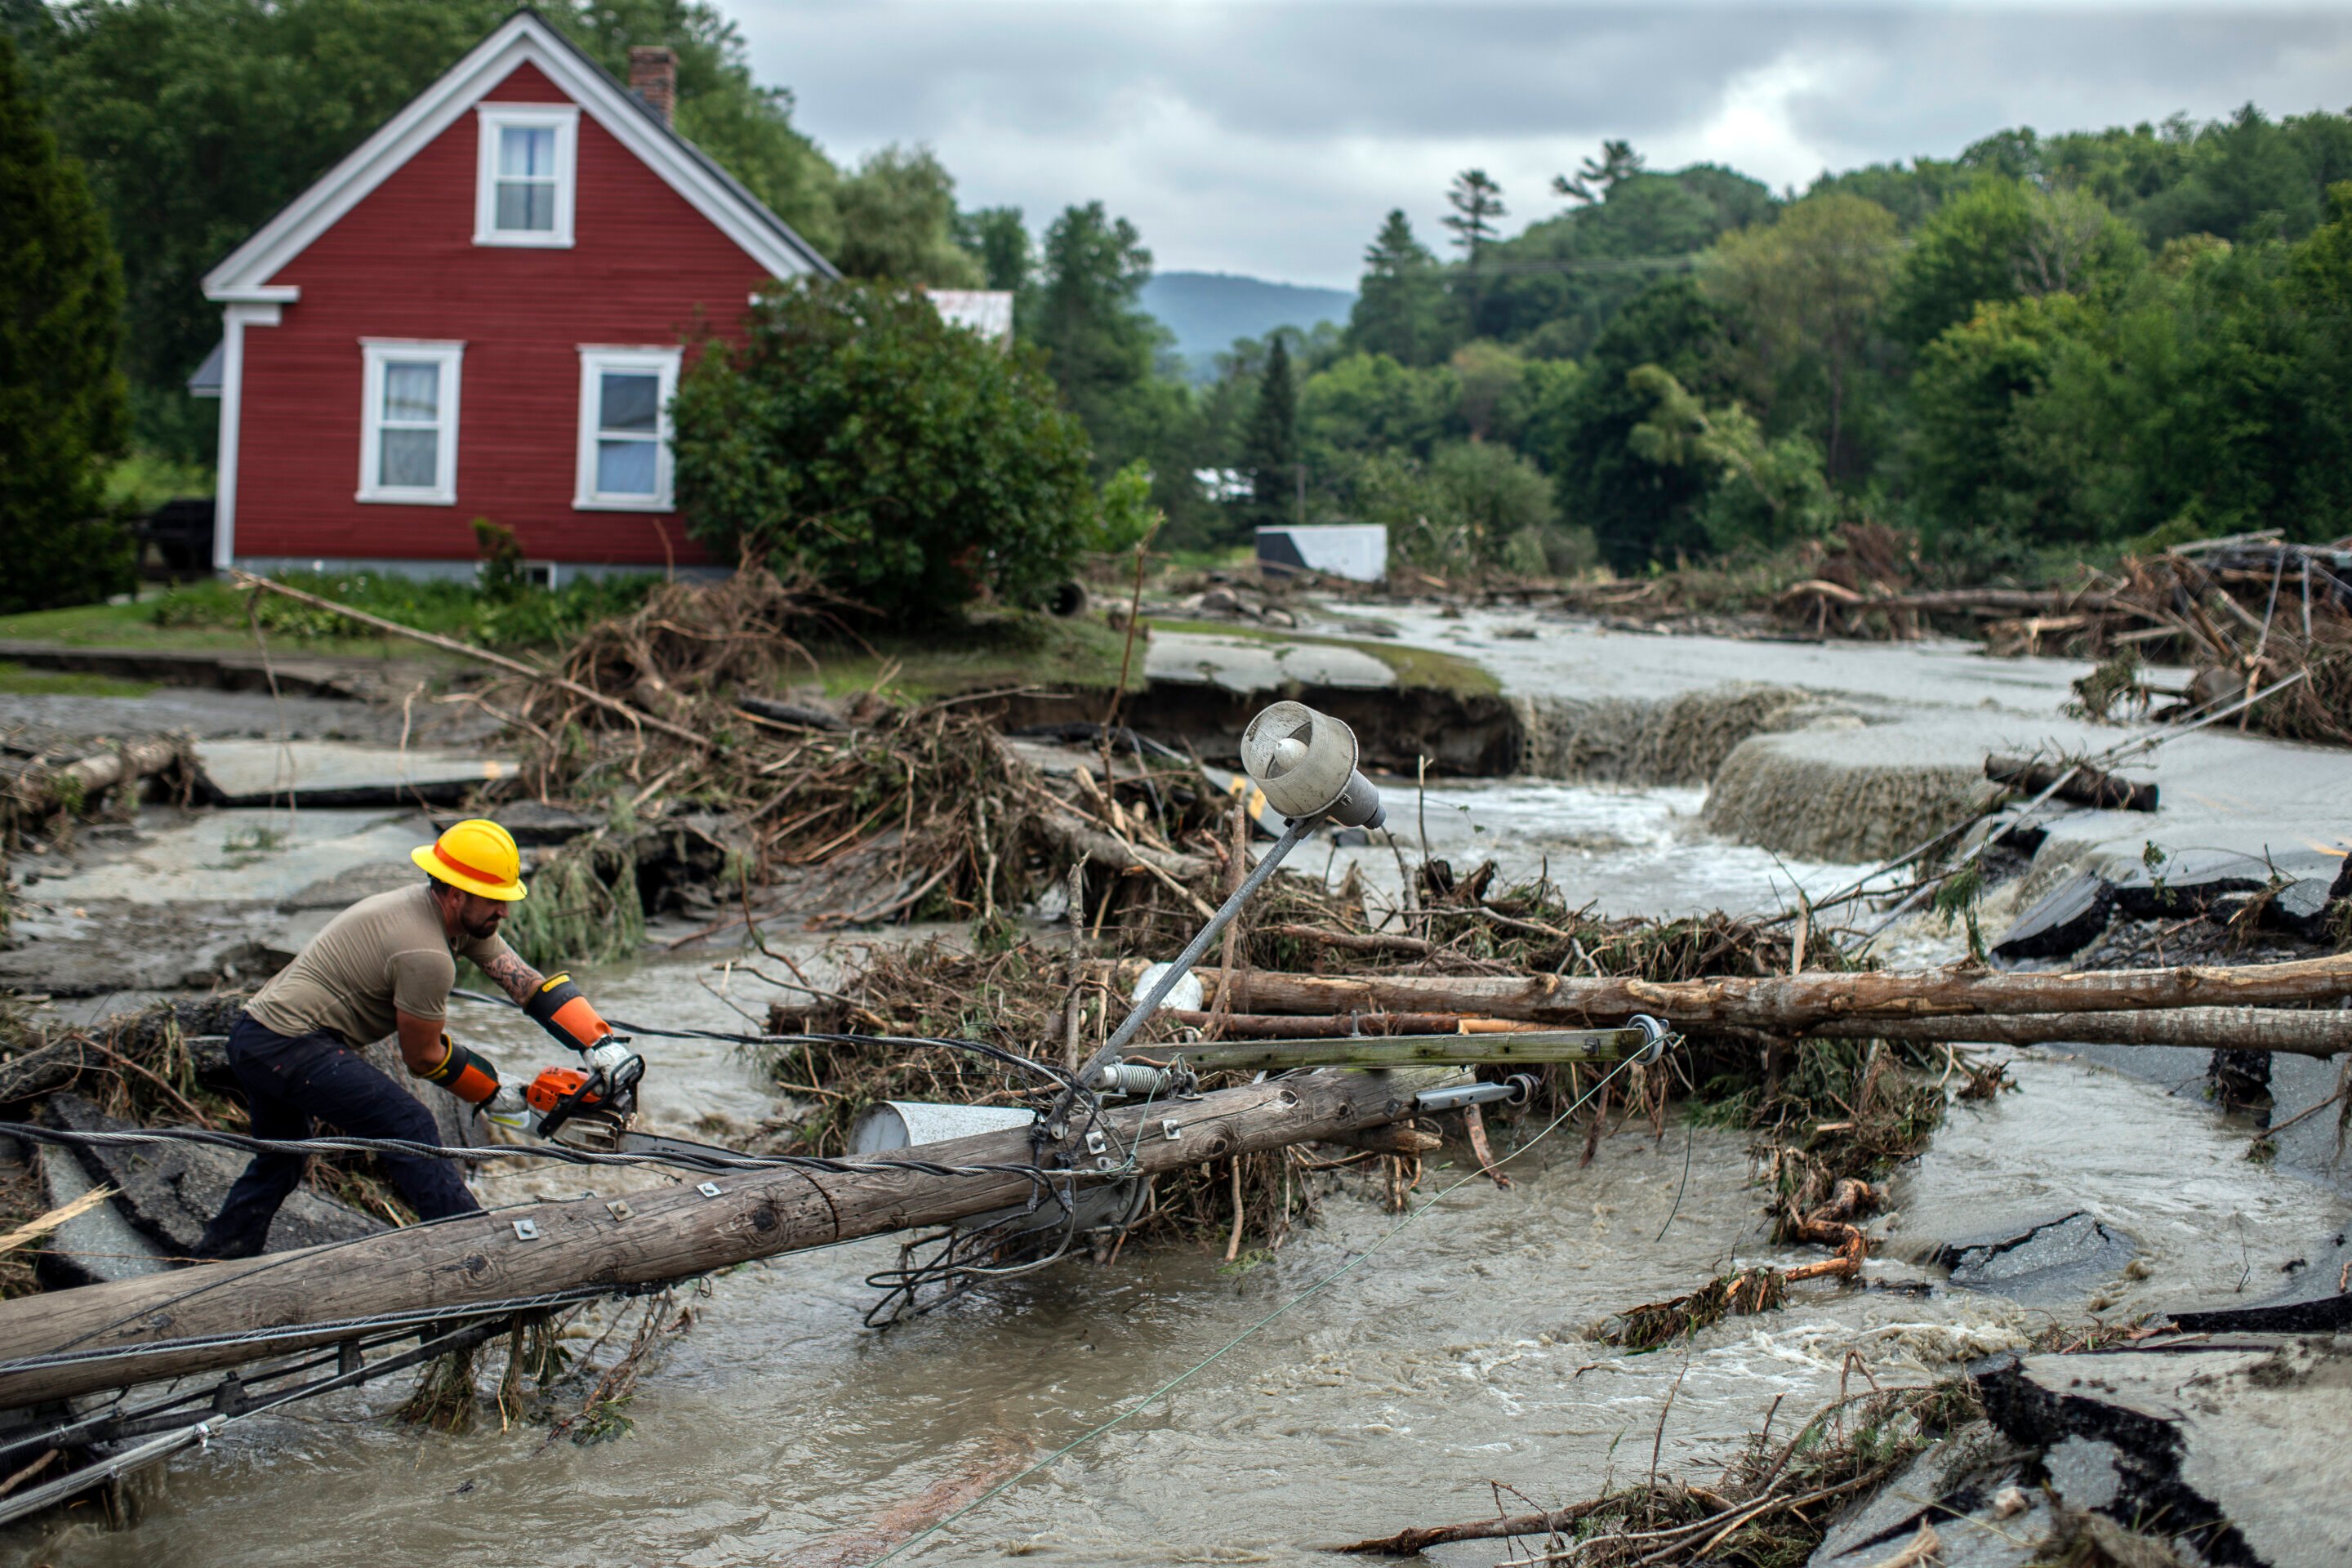 Why does Vermont keep flooding? It's complicated, but experts warn it could become the norm